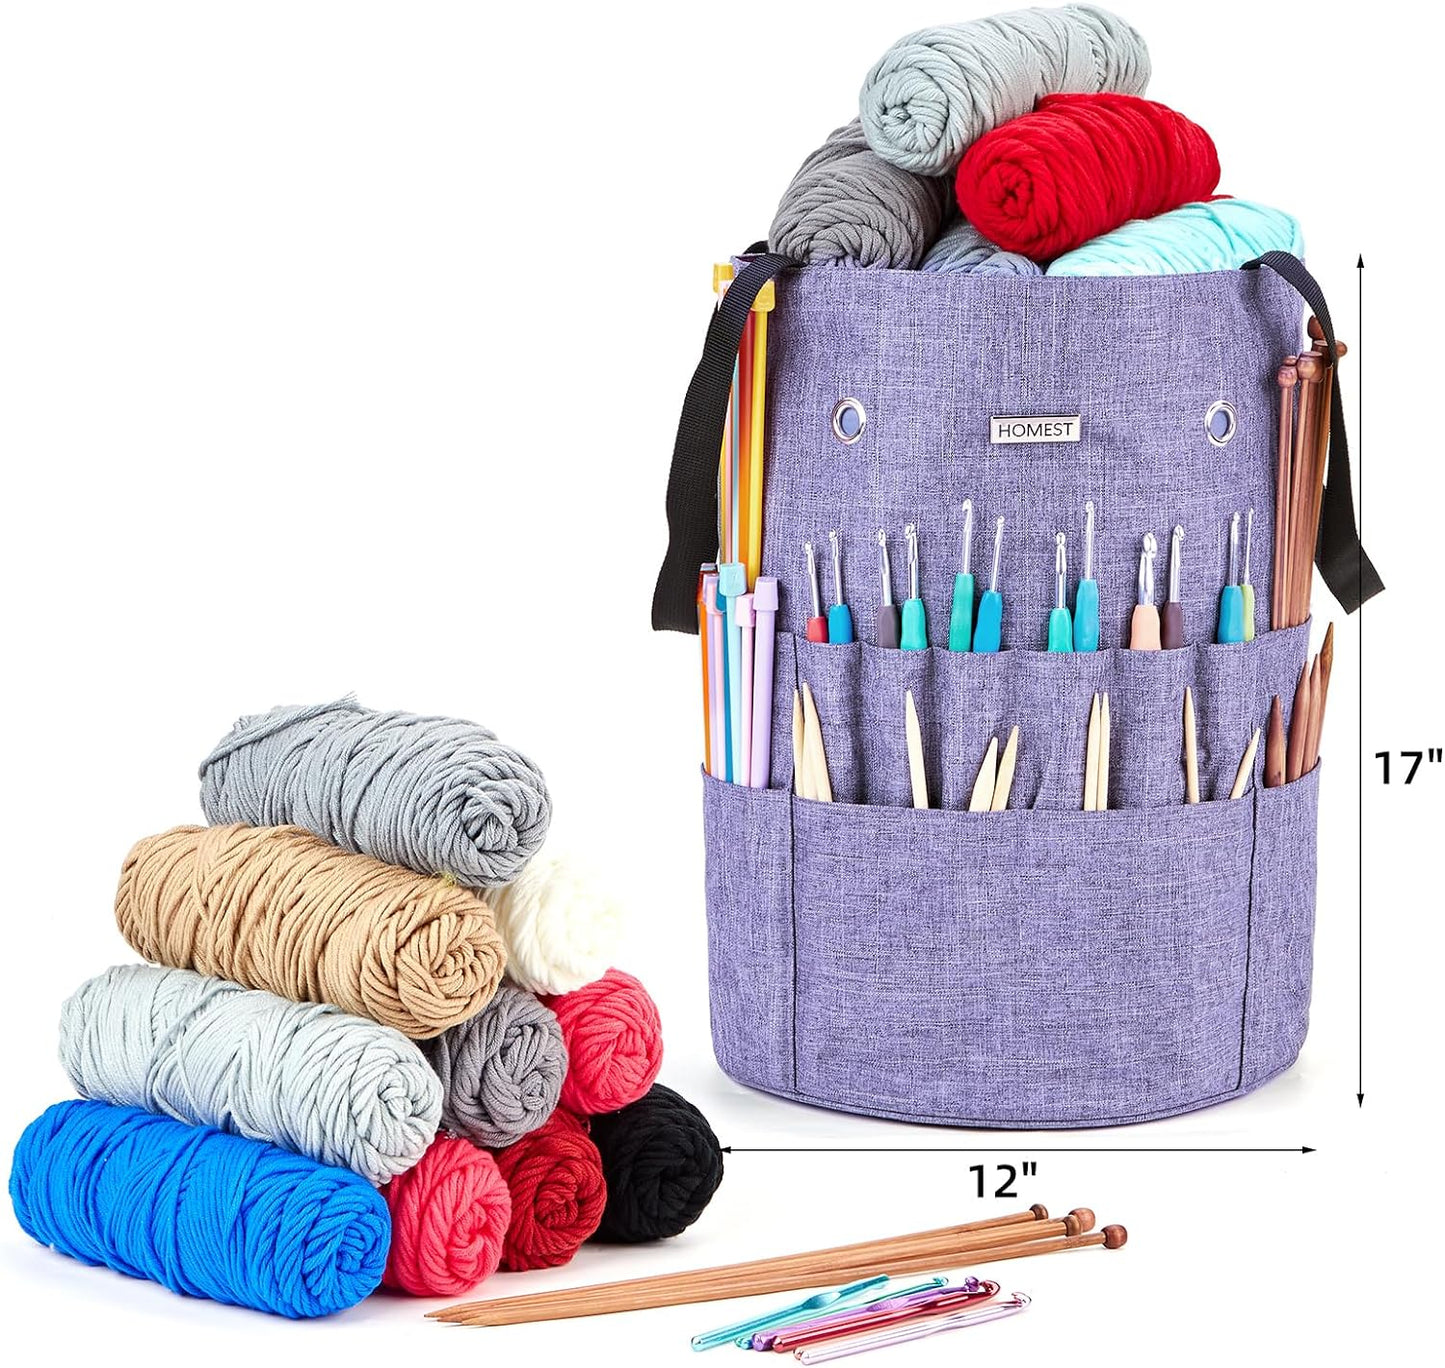 Large Crochet Bag with Customized Front Compartment for Knitting Accessories, Yarn Storage with 6 Oversized Grommets, Tote Organizer with Drawstring Closure, Purple, Bag Only